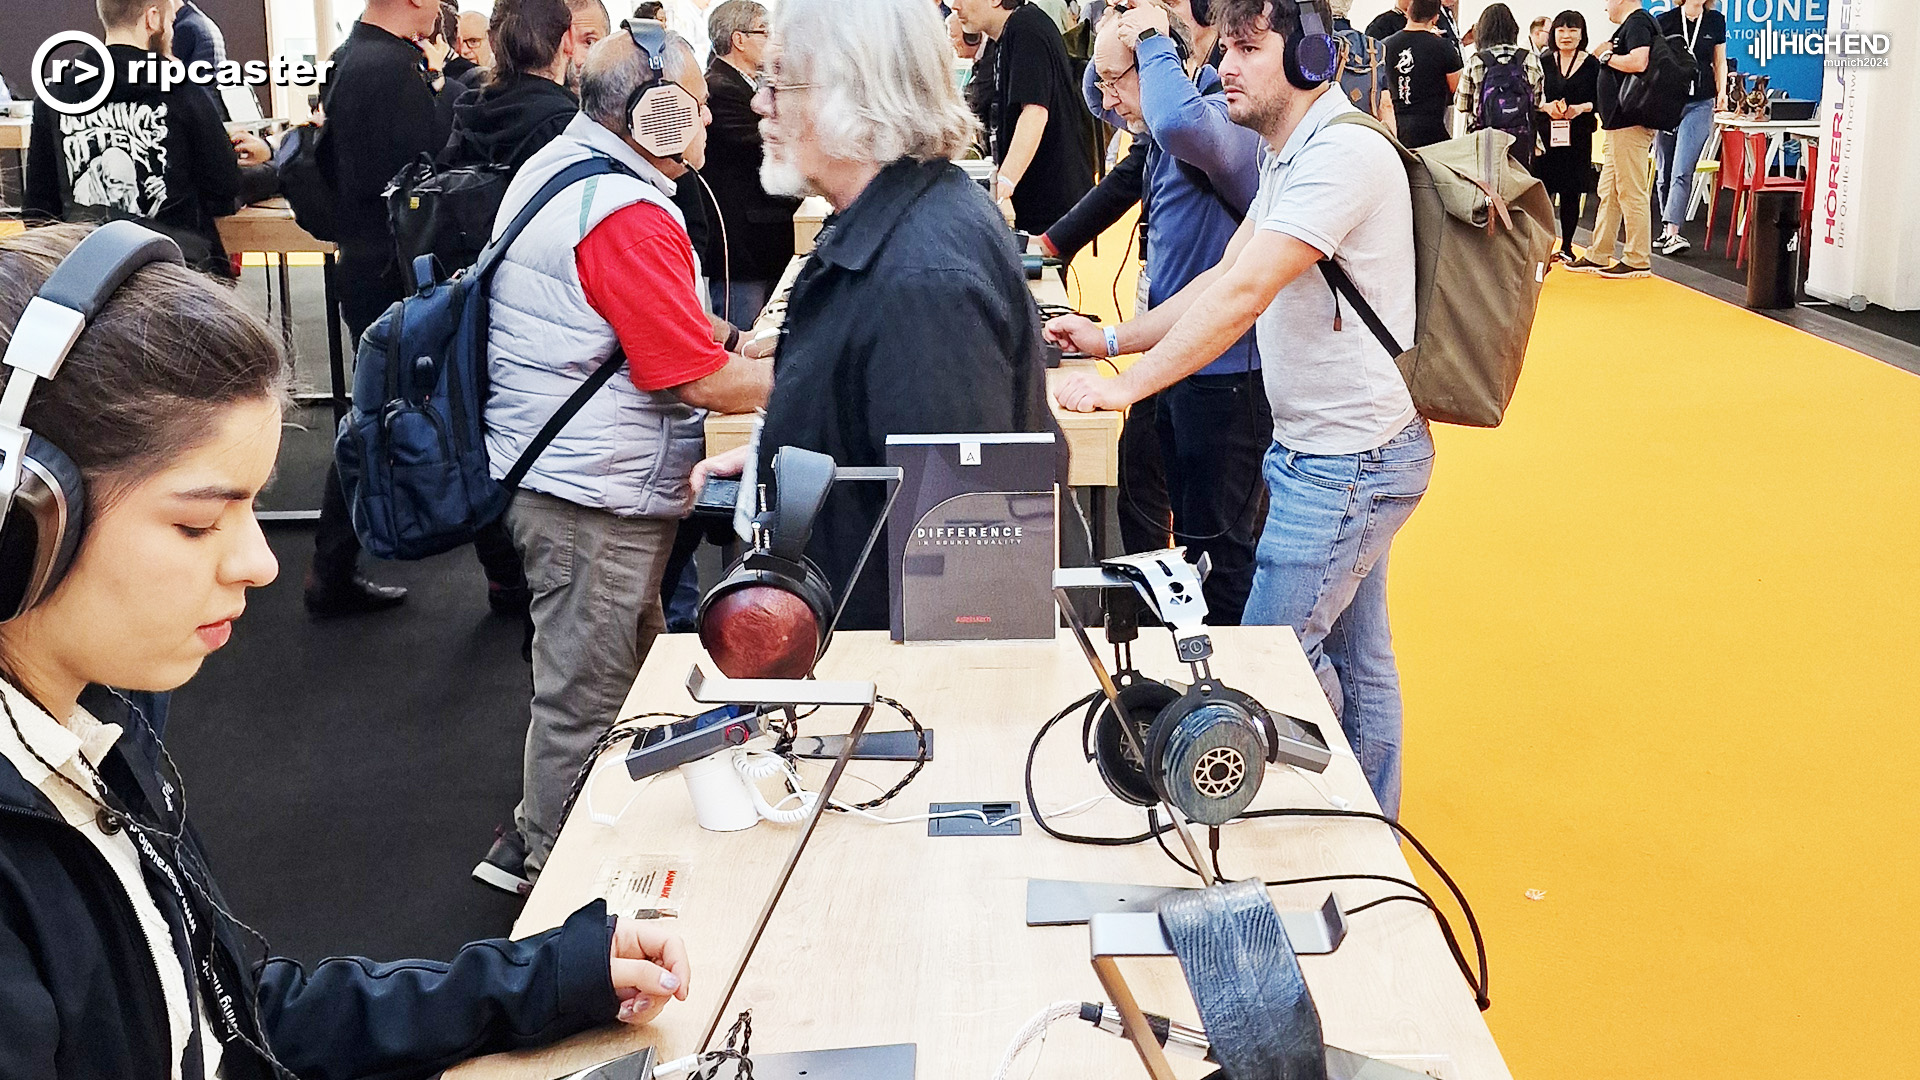 A young woman in the foreground wearing headphones.  Lots of people in the background of the photo also wearing headphones and some looking around generally